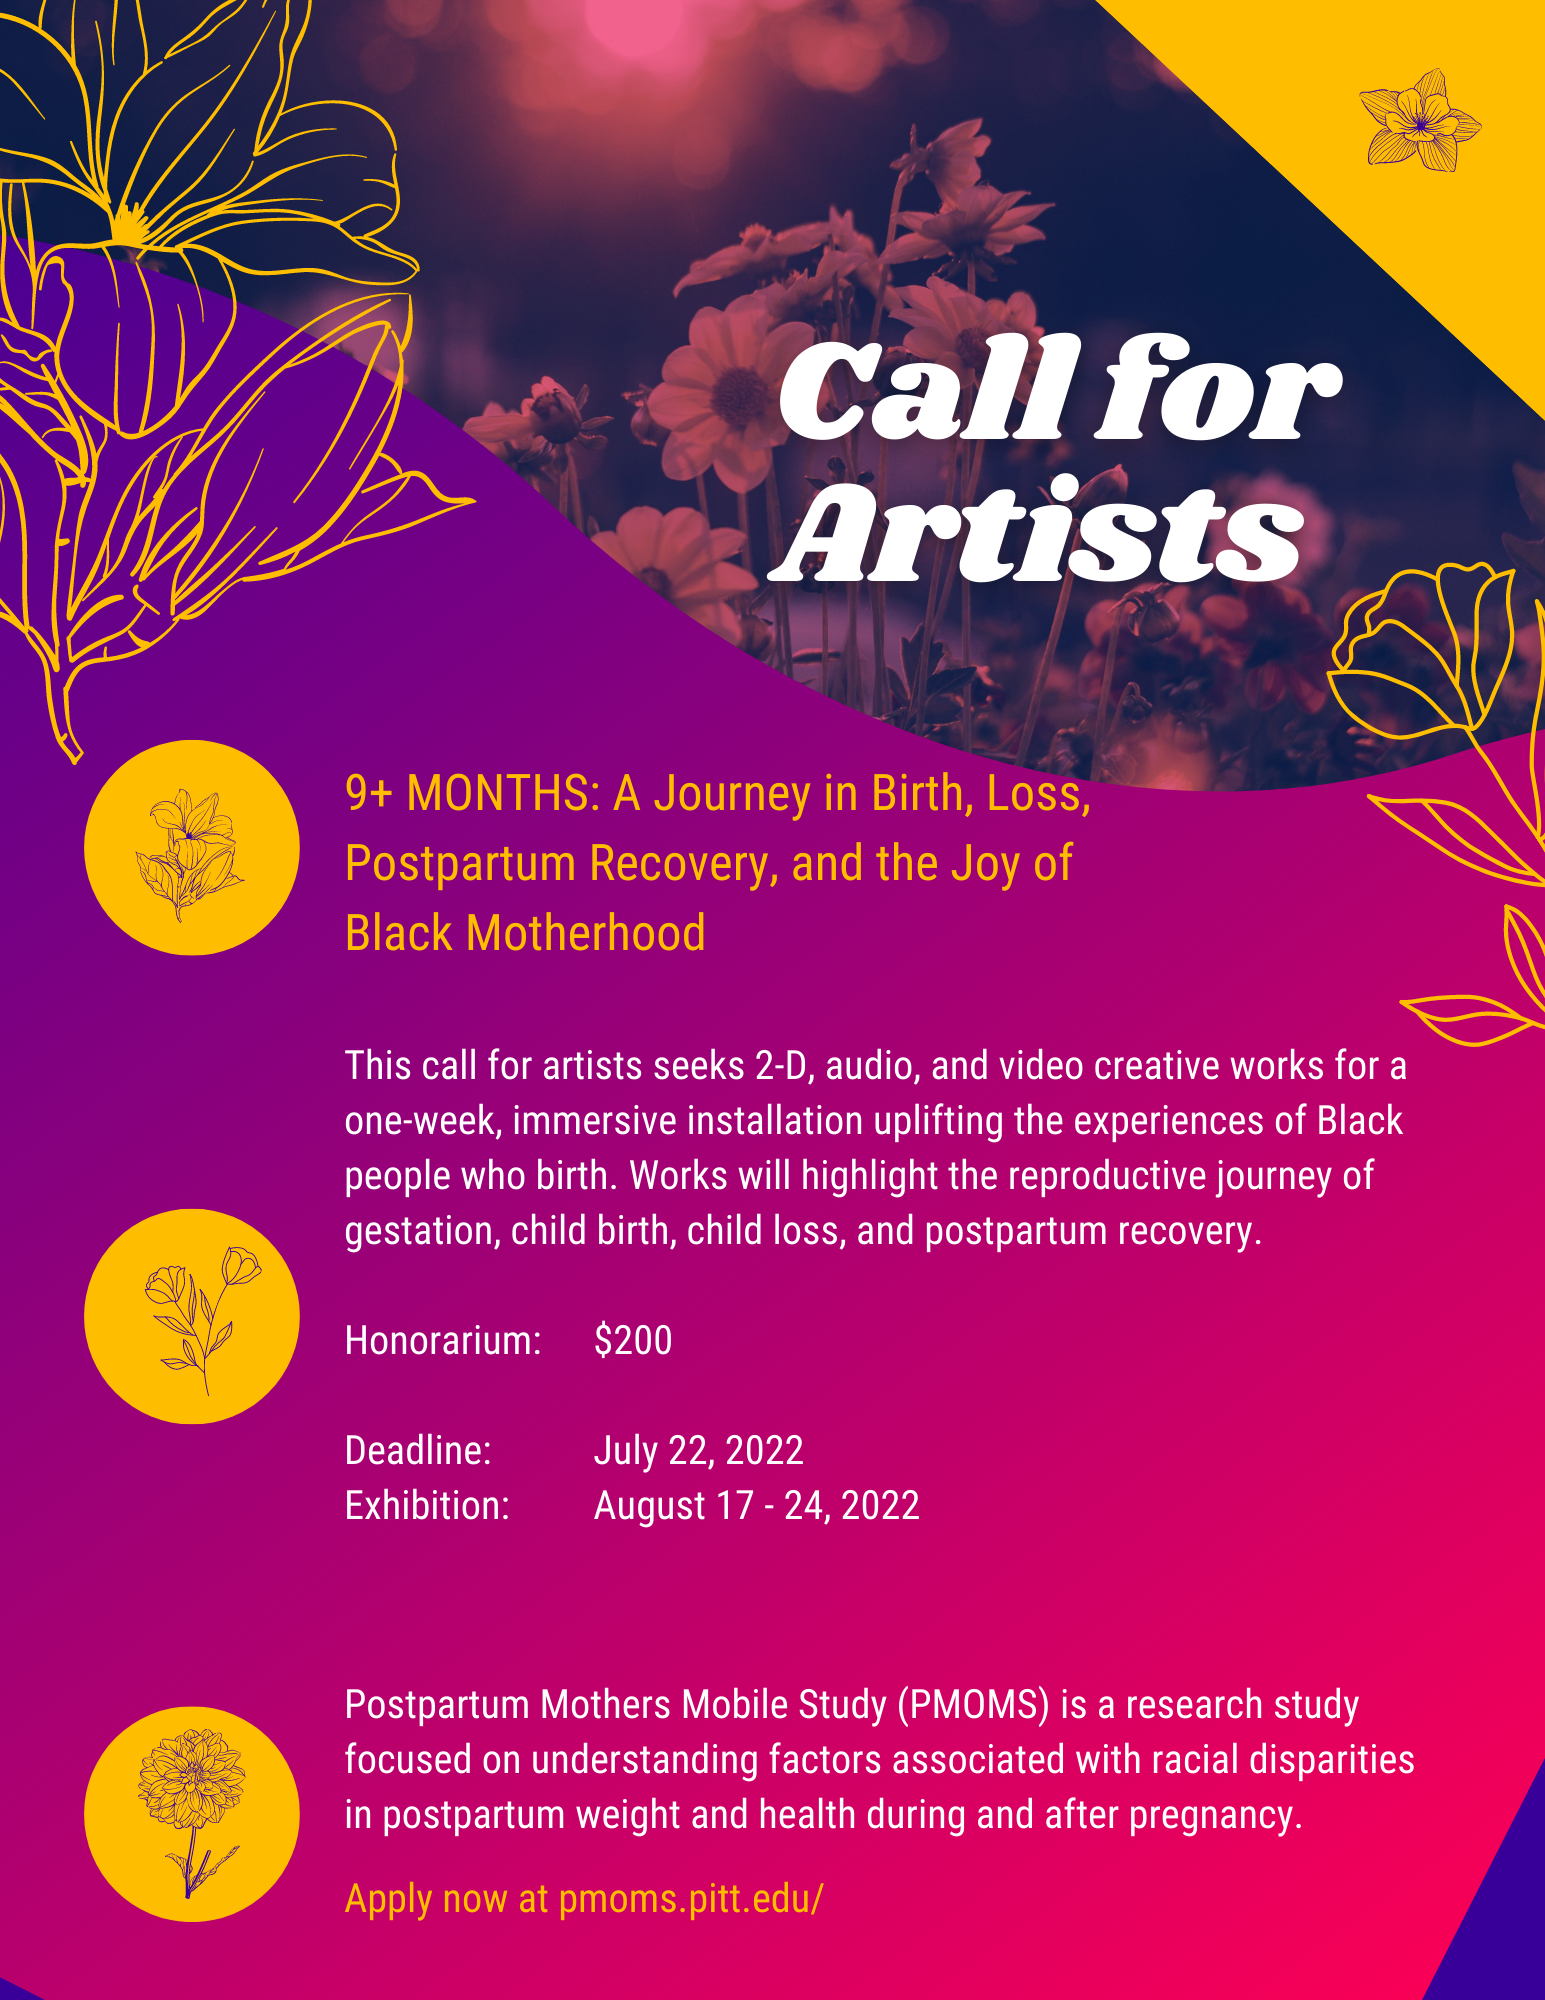 Call for Artists: This call for Black artists in the Pittsburgh region, Allegheny County, and South Western Pennslyvania seeks work highlighting gestation, child birth, child loss, postpartum, and more.